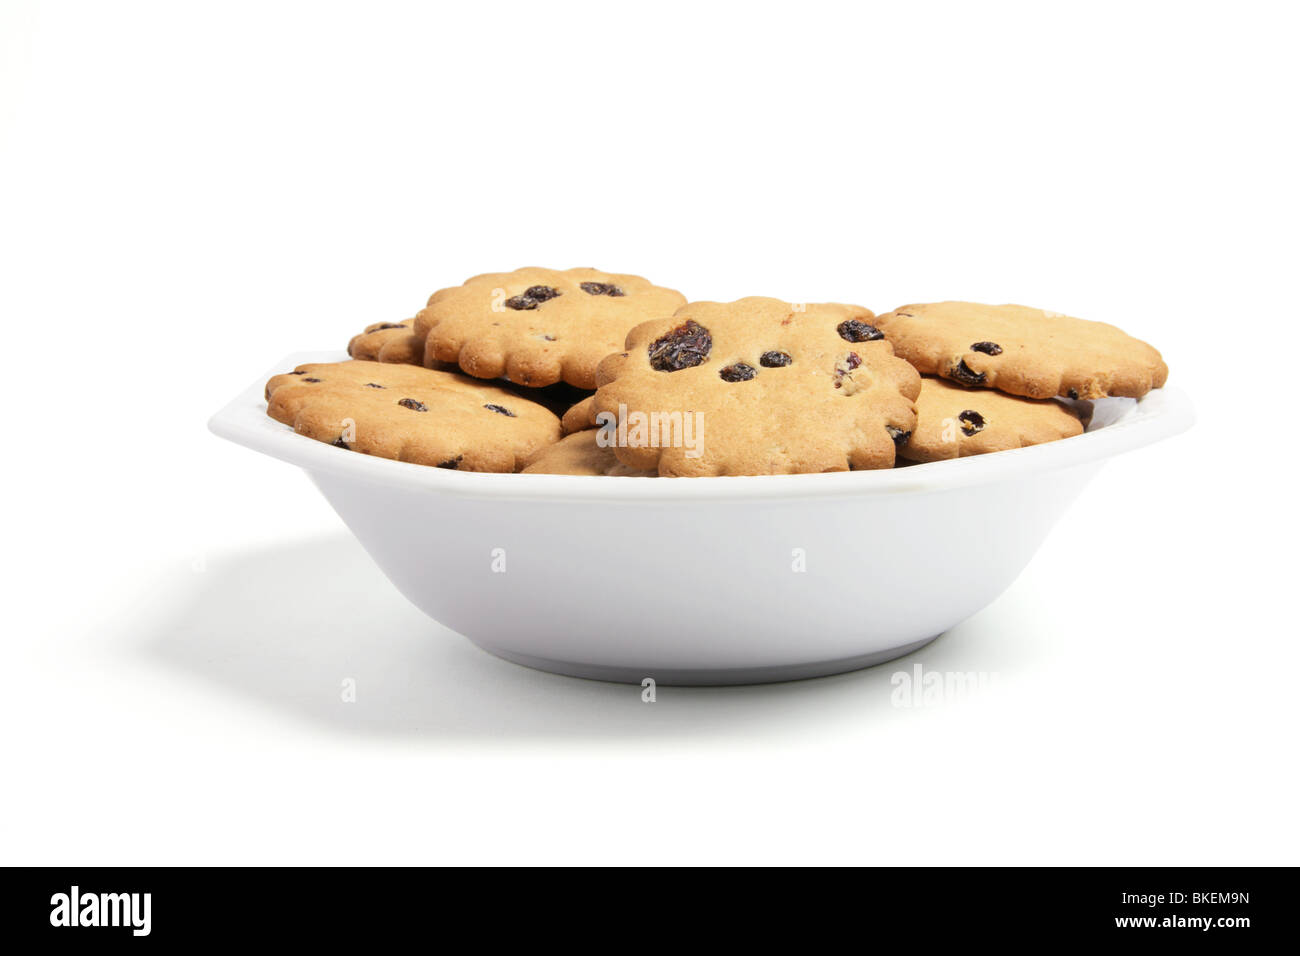 Plate of Raisin Biscuits Stock Photo